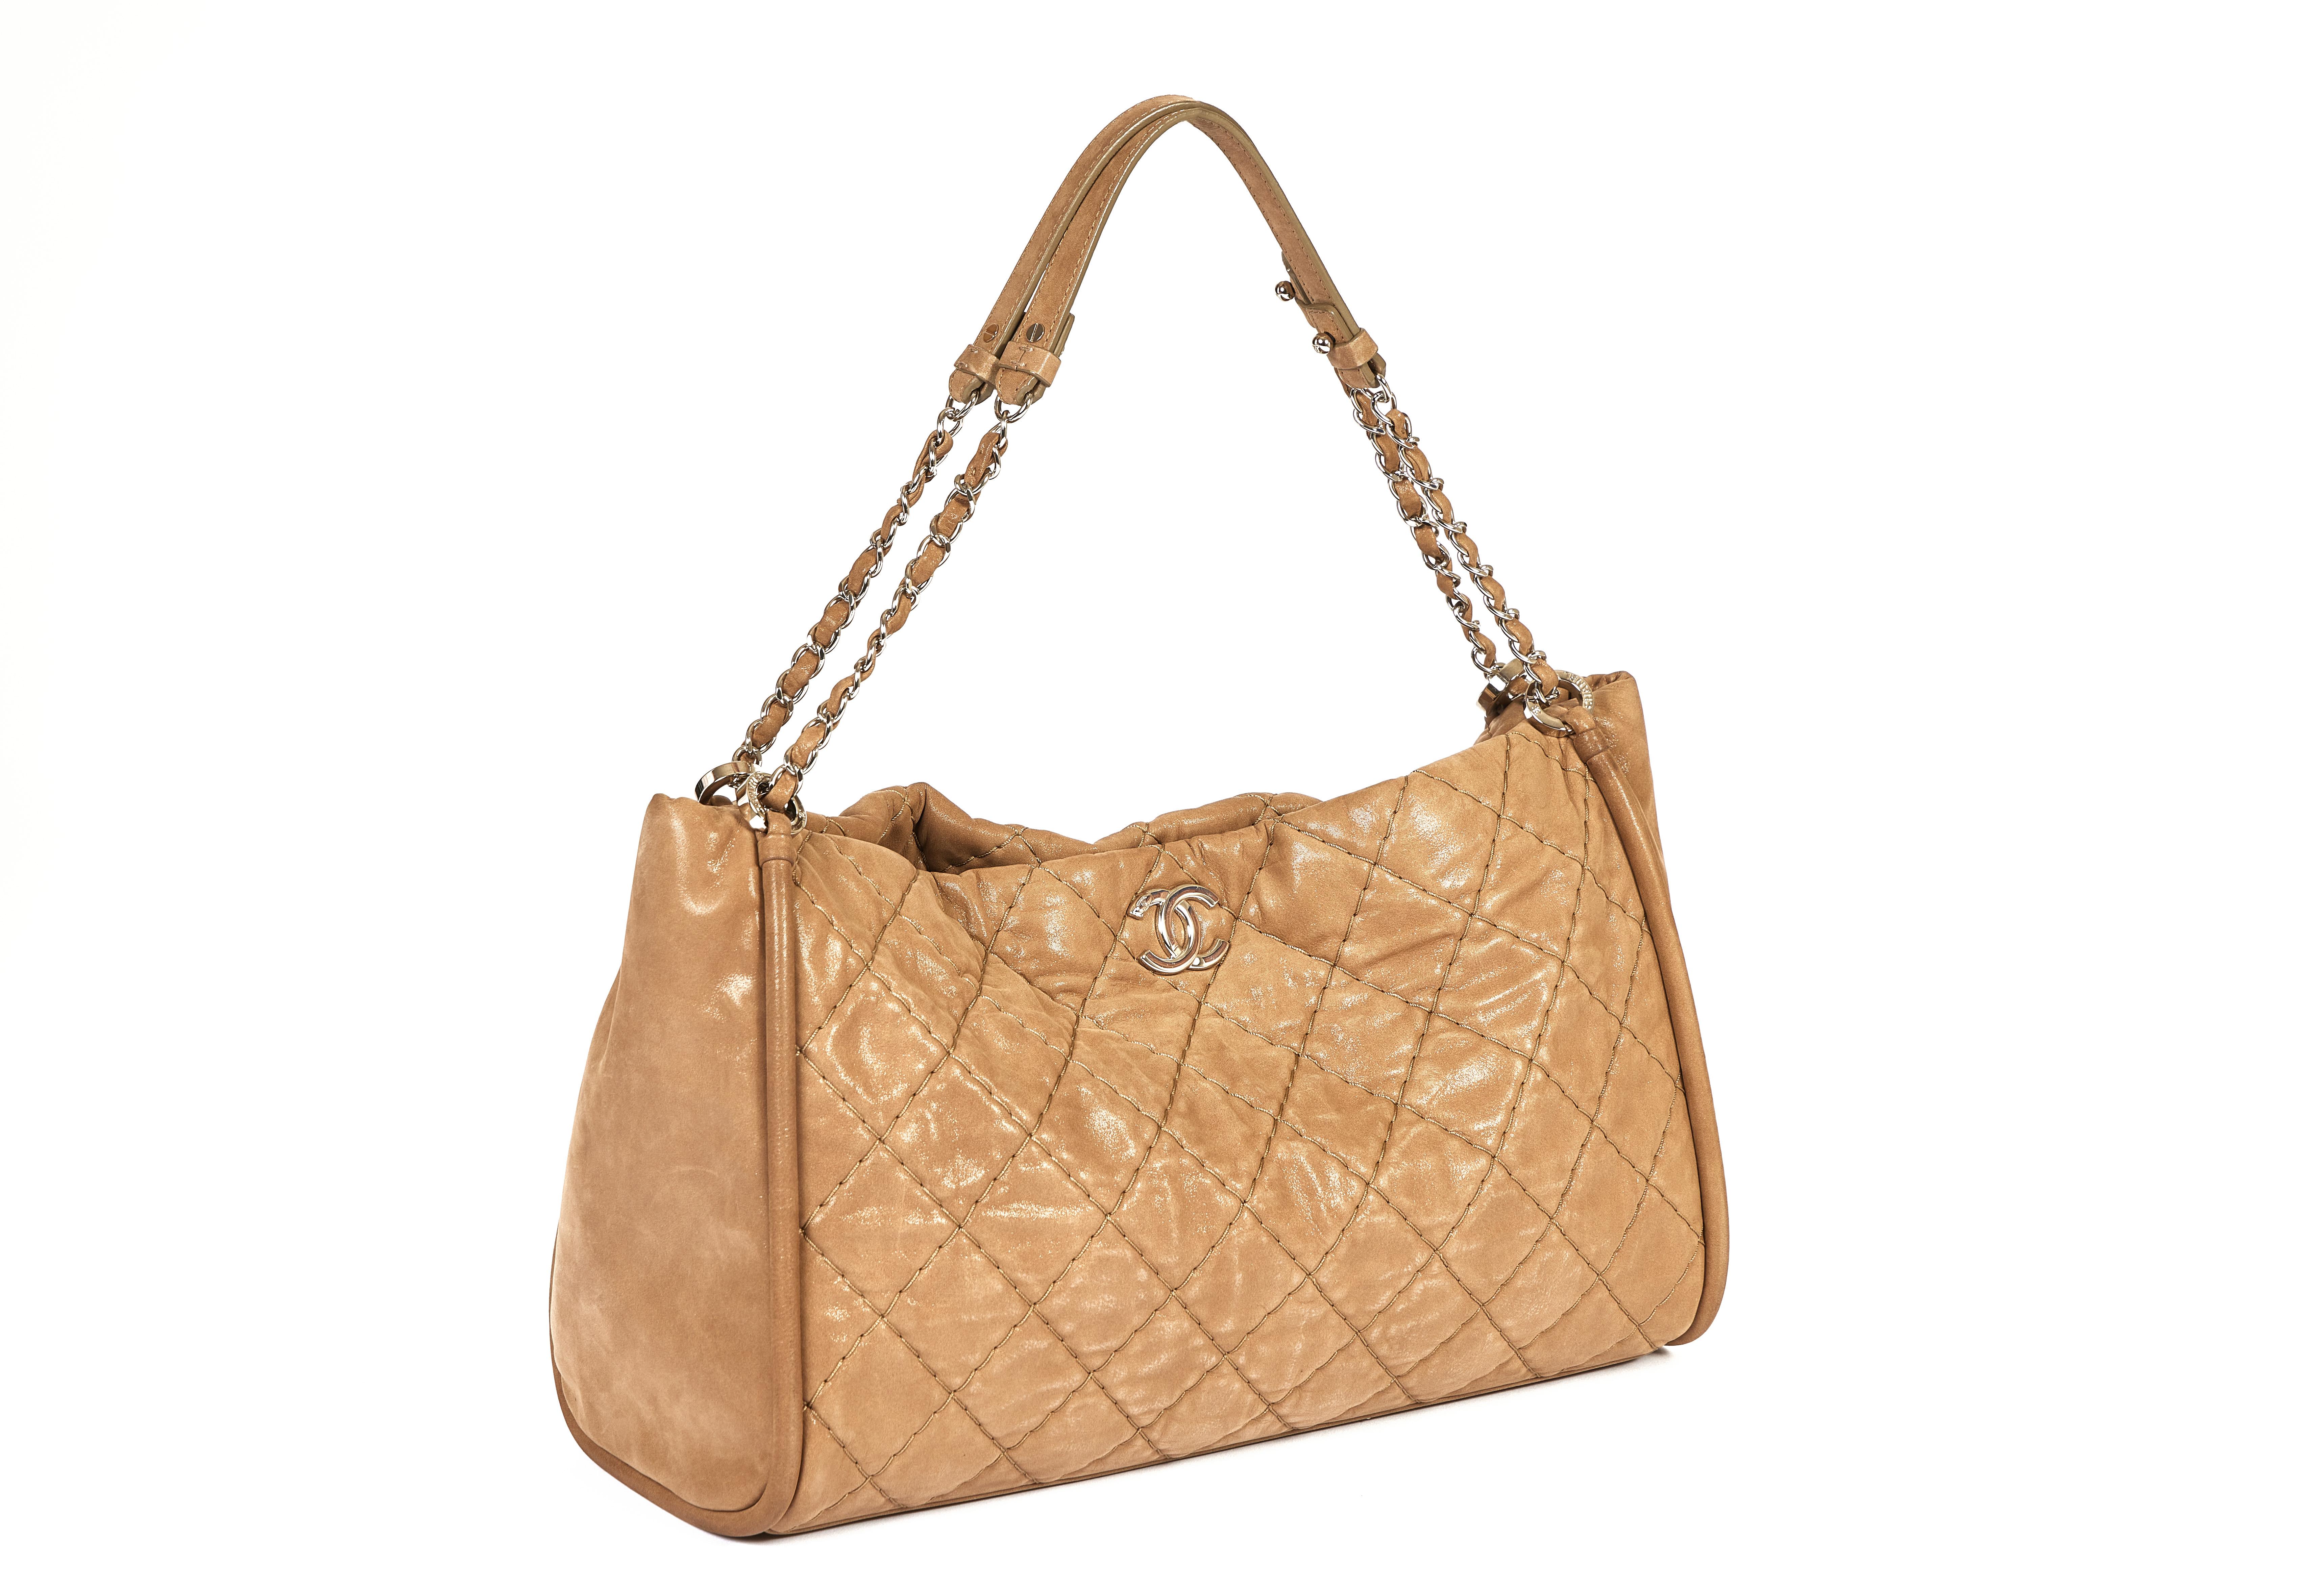 This beautiful Chanel shoulder bag in beige is made of glazed quilted suede leather and has a stitched on a quilted pattern. A double CC logo in silver is attached on the front which matches perfectly with the silver shoulder chains. One small ink